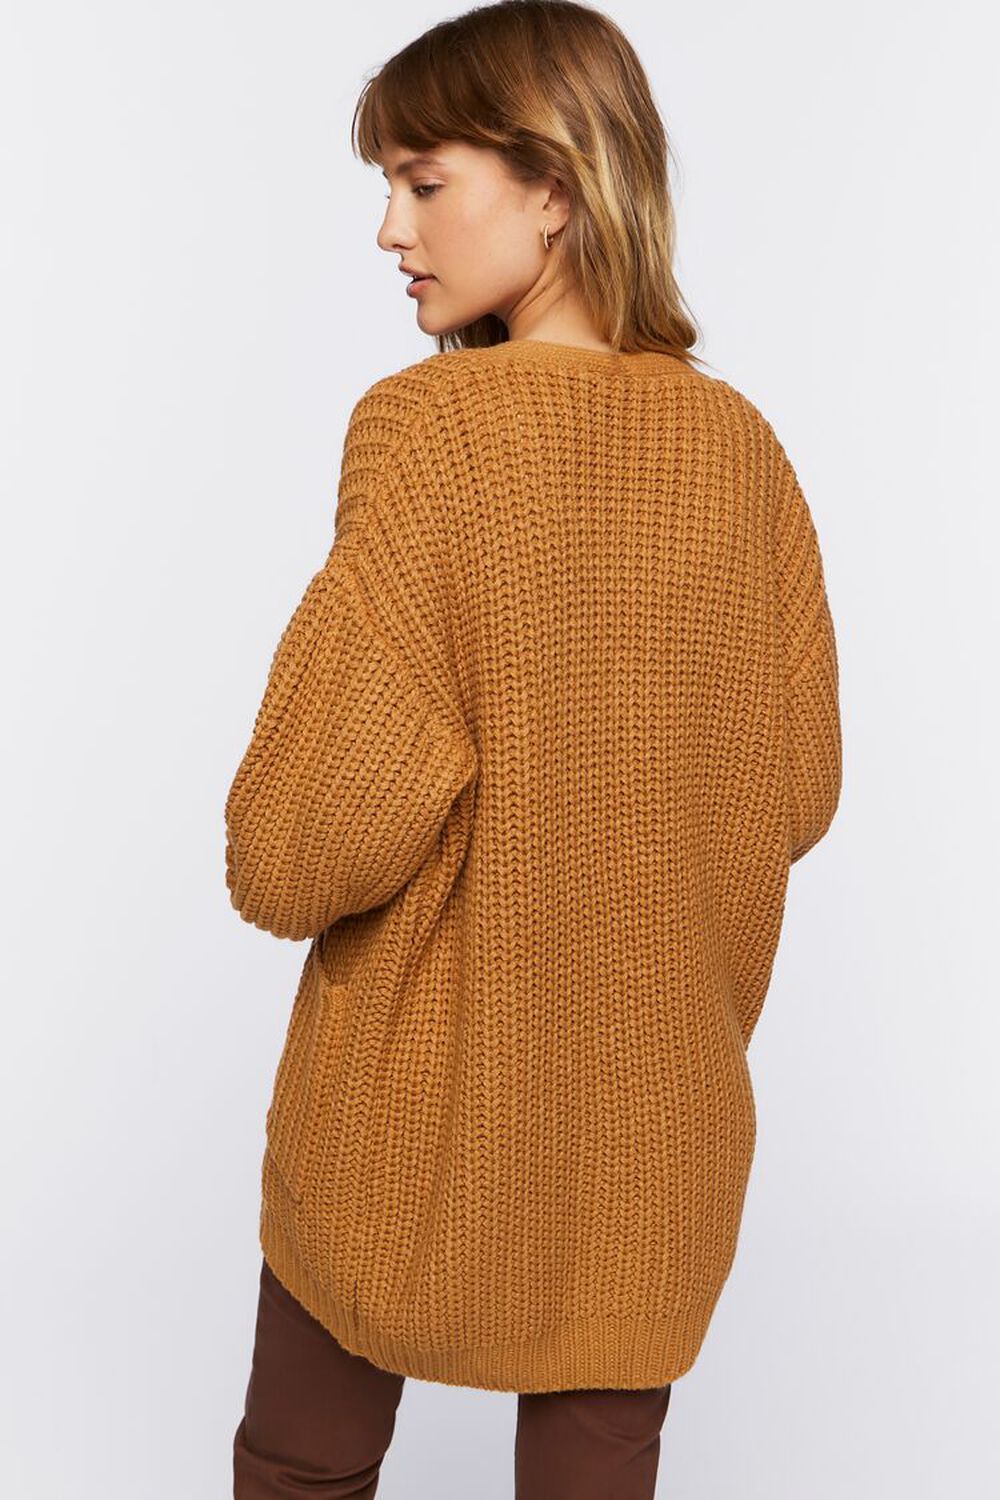 COCOA Chunky Knit Cardigan Sweater, image 3